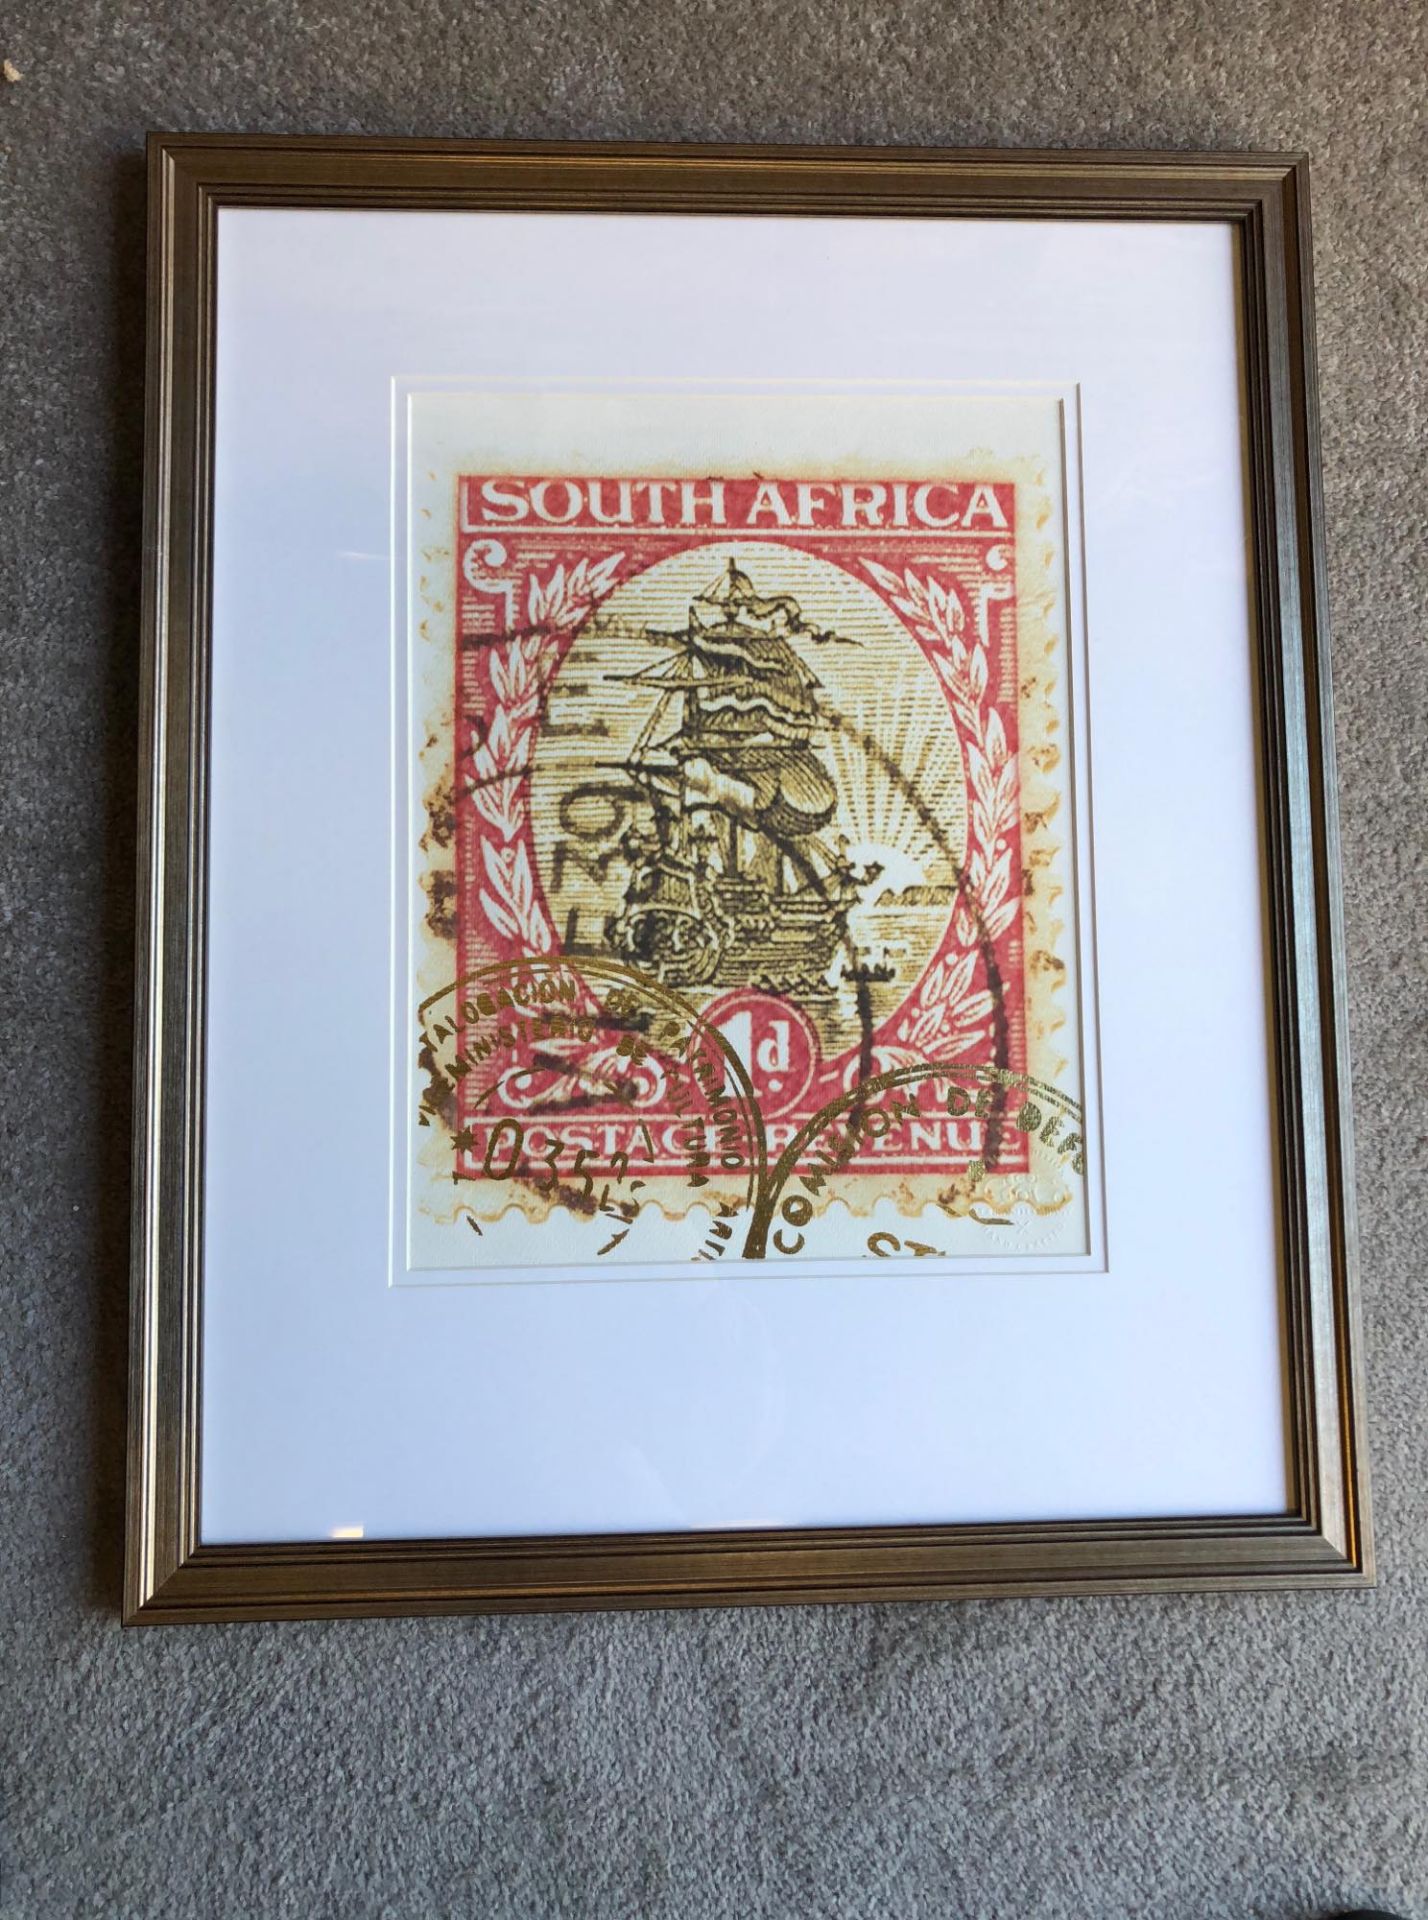 Artwork - Framed Graphic Art Print -The Enlarged Print Of An Antique Postage Stamp From South Africa